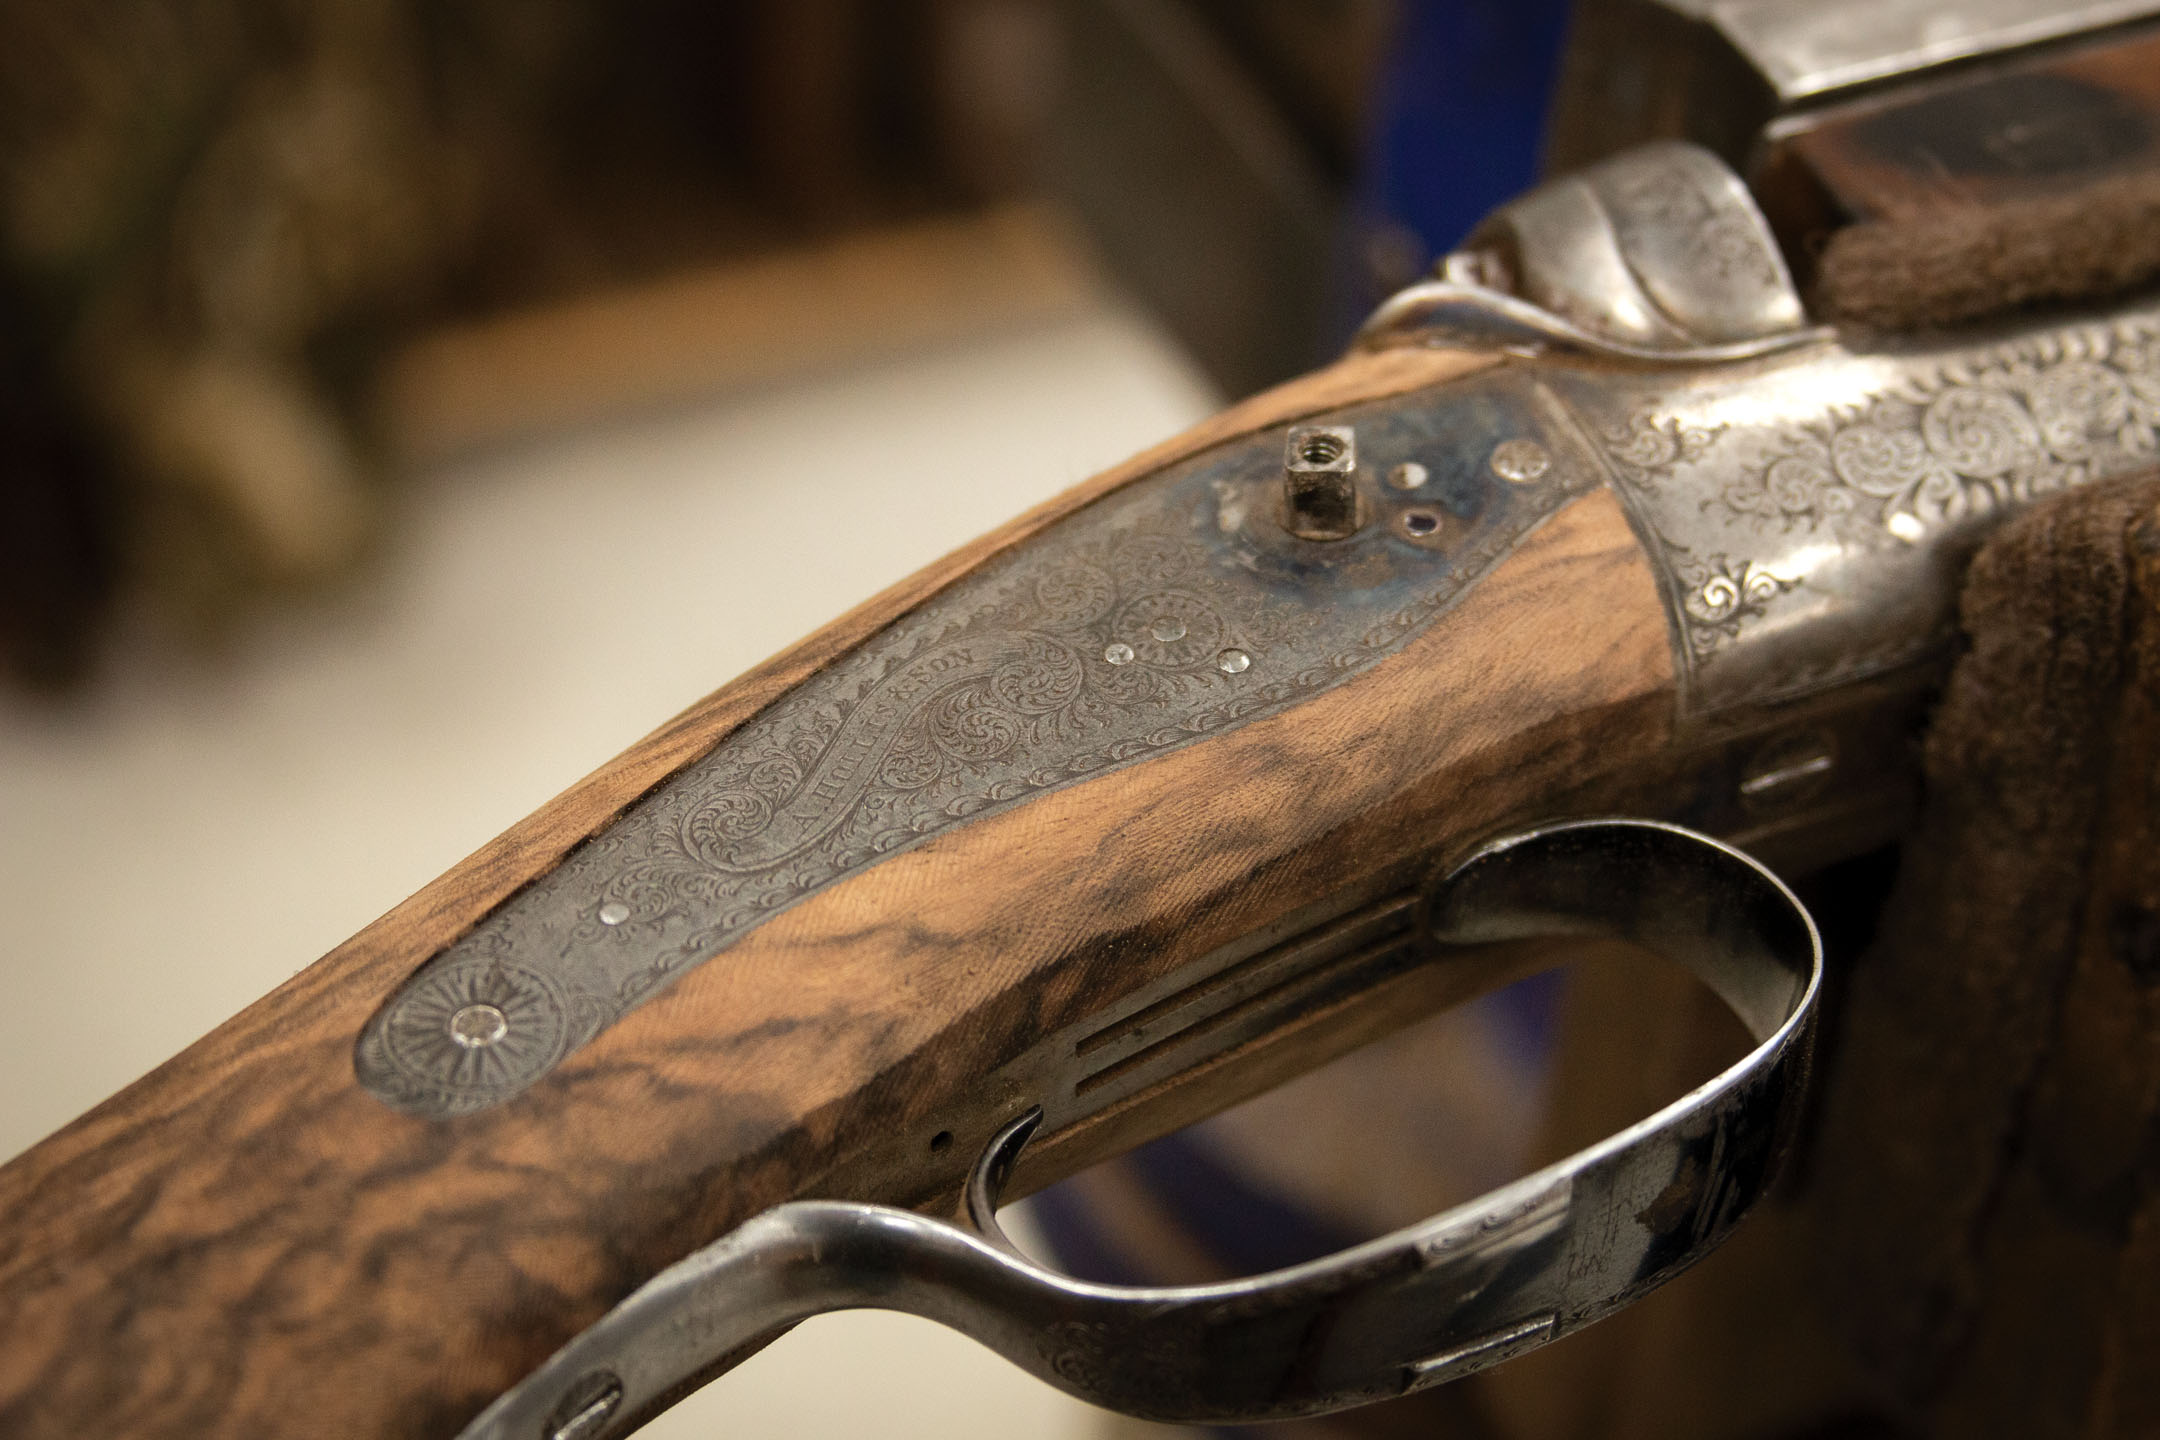 Inletting work performed during an A. Hollis & Son double rifle restoration project